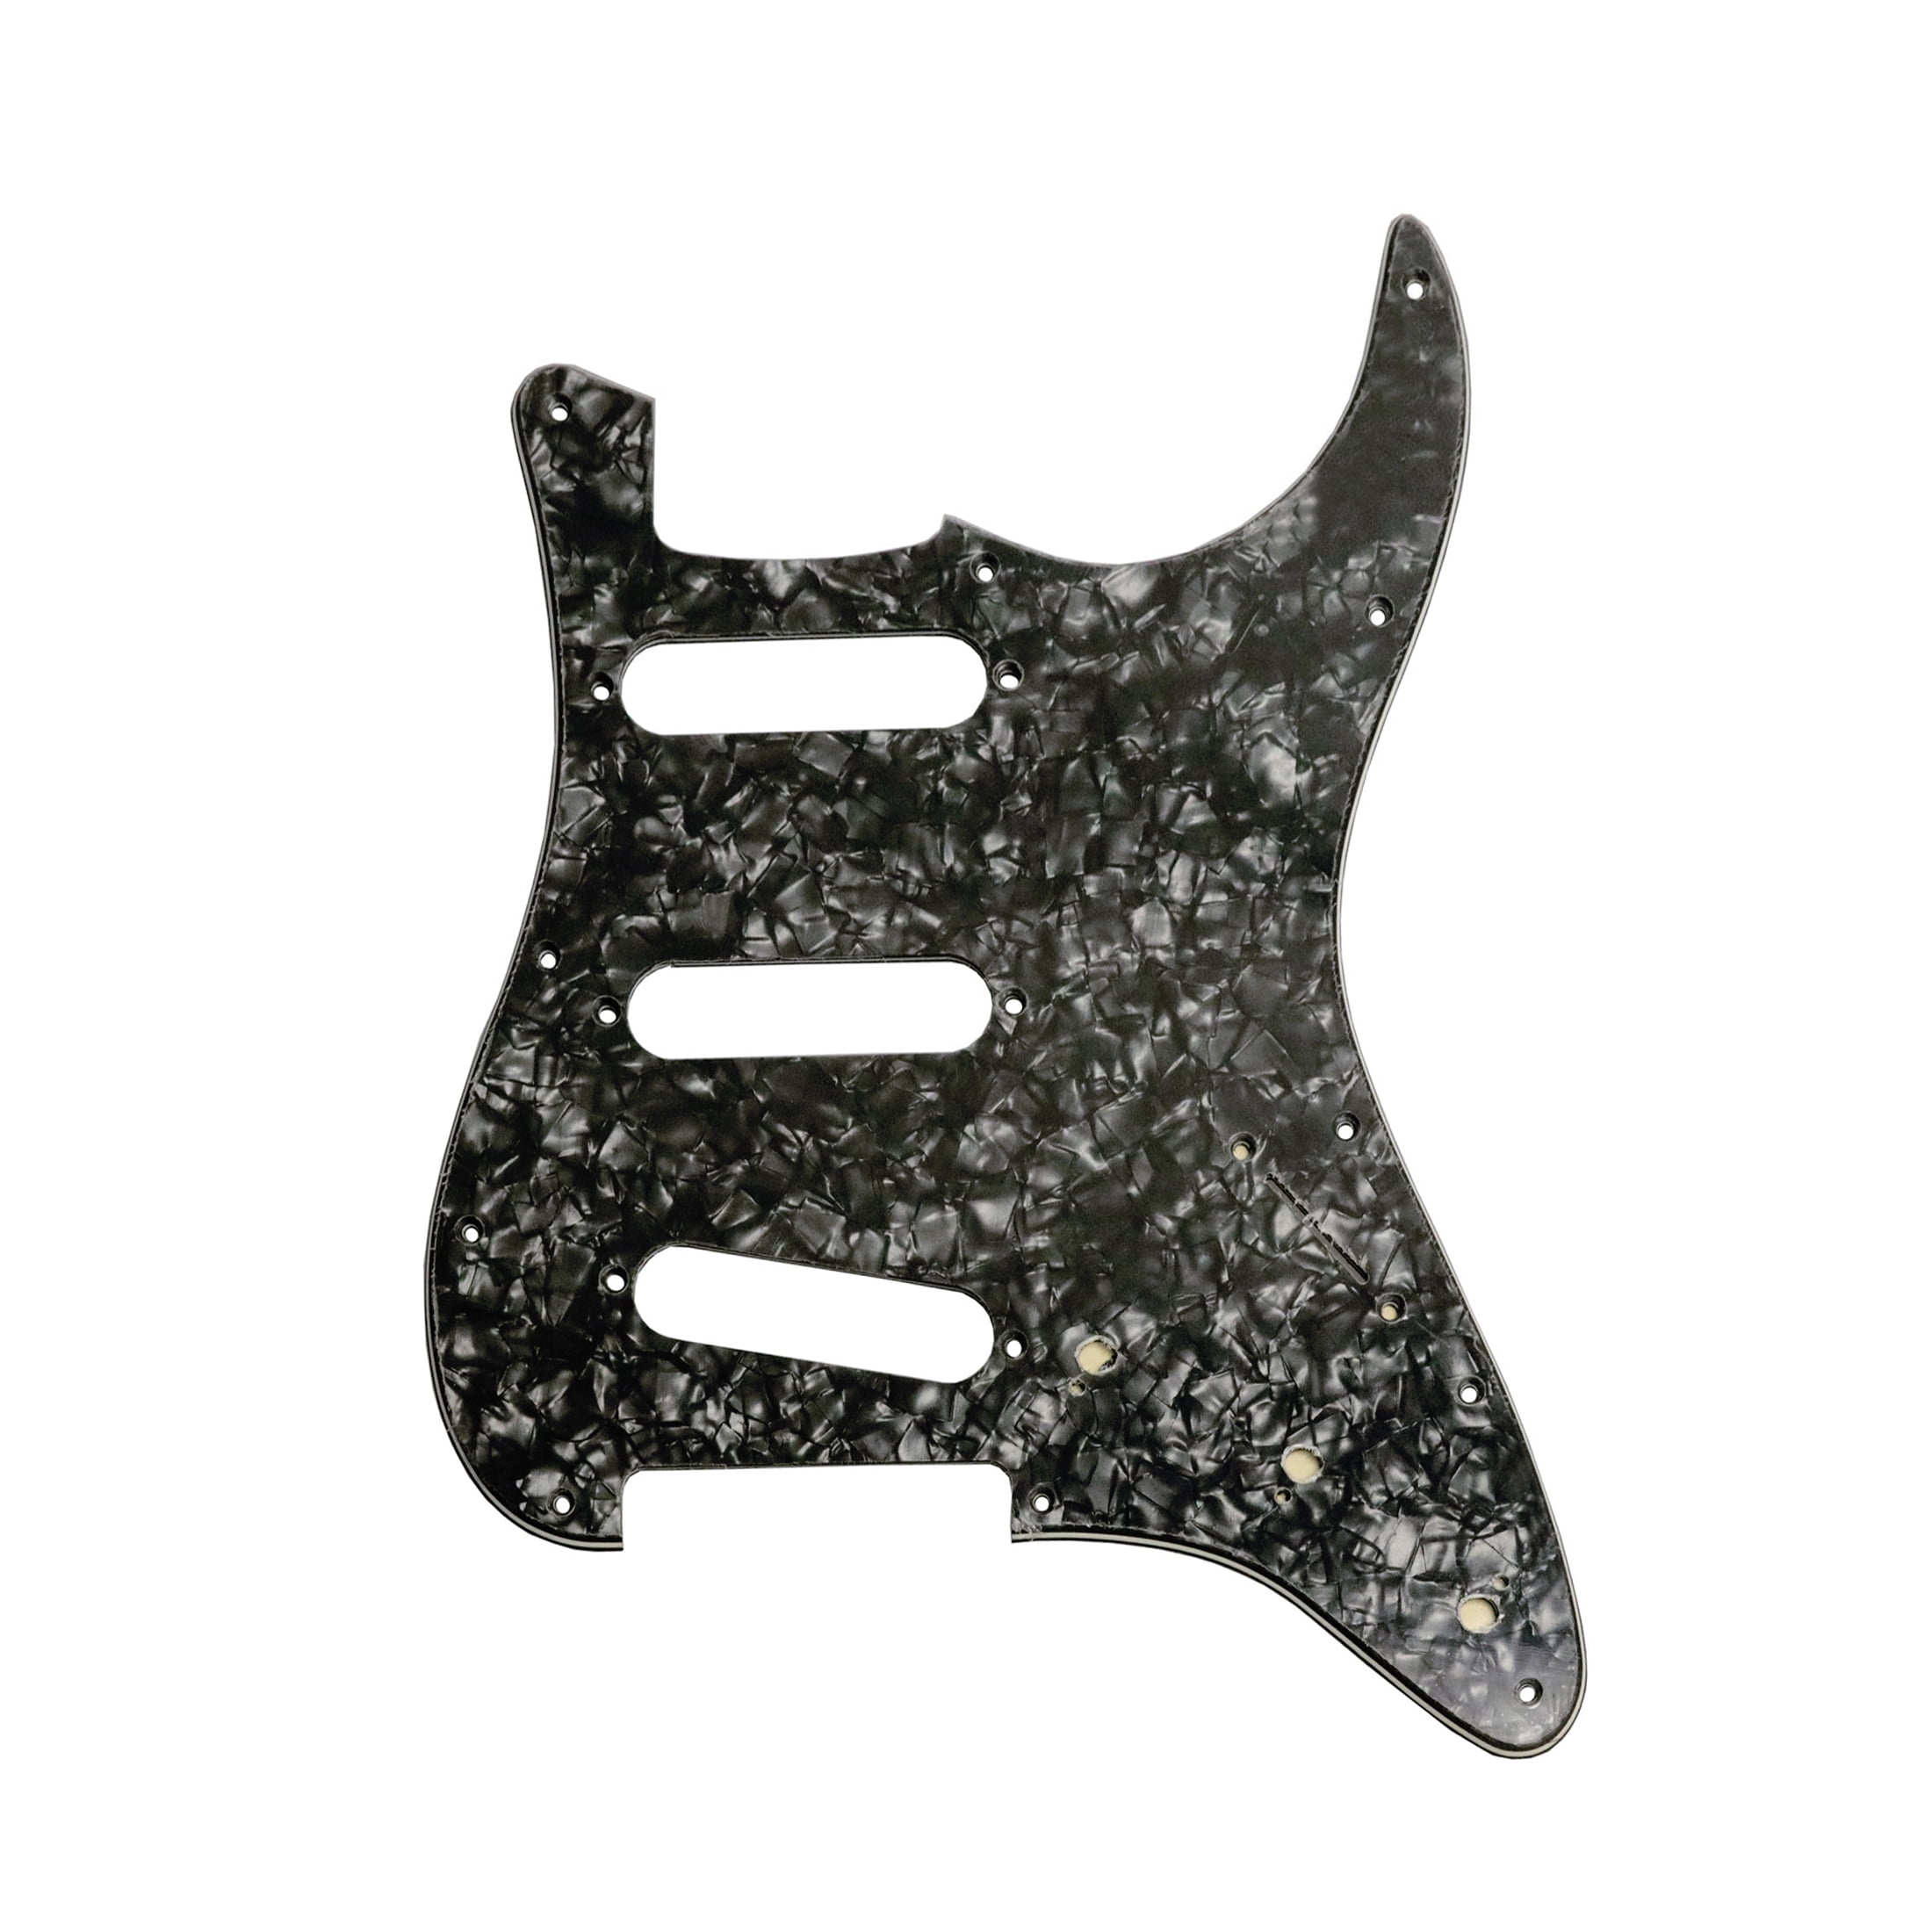 Metallor Electric Guitar Pickguard 3 Ply 11 holes SSS Single Coil Compatible with Strat Style Modern Guitar Parts Replacement 